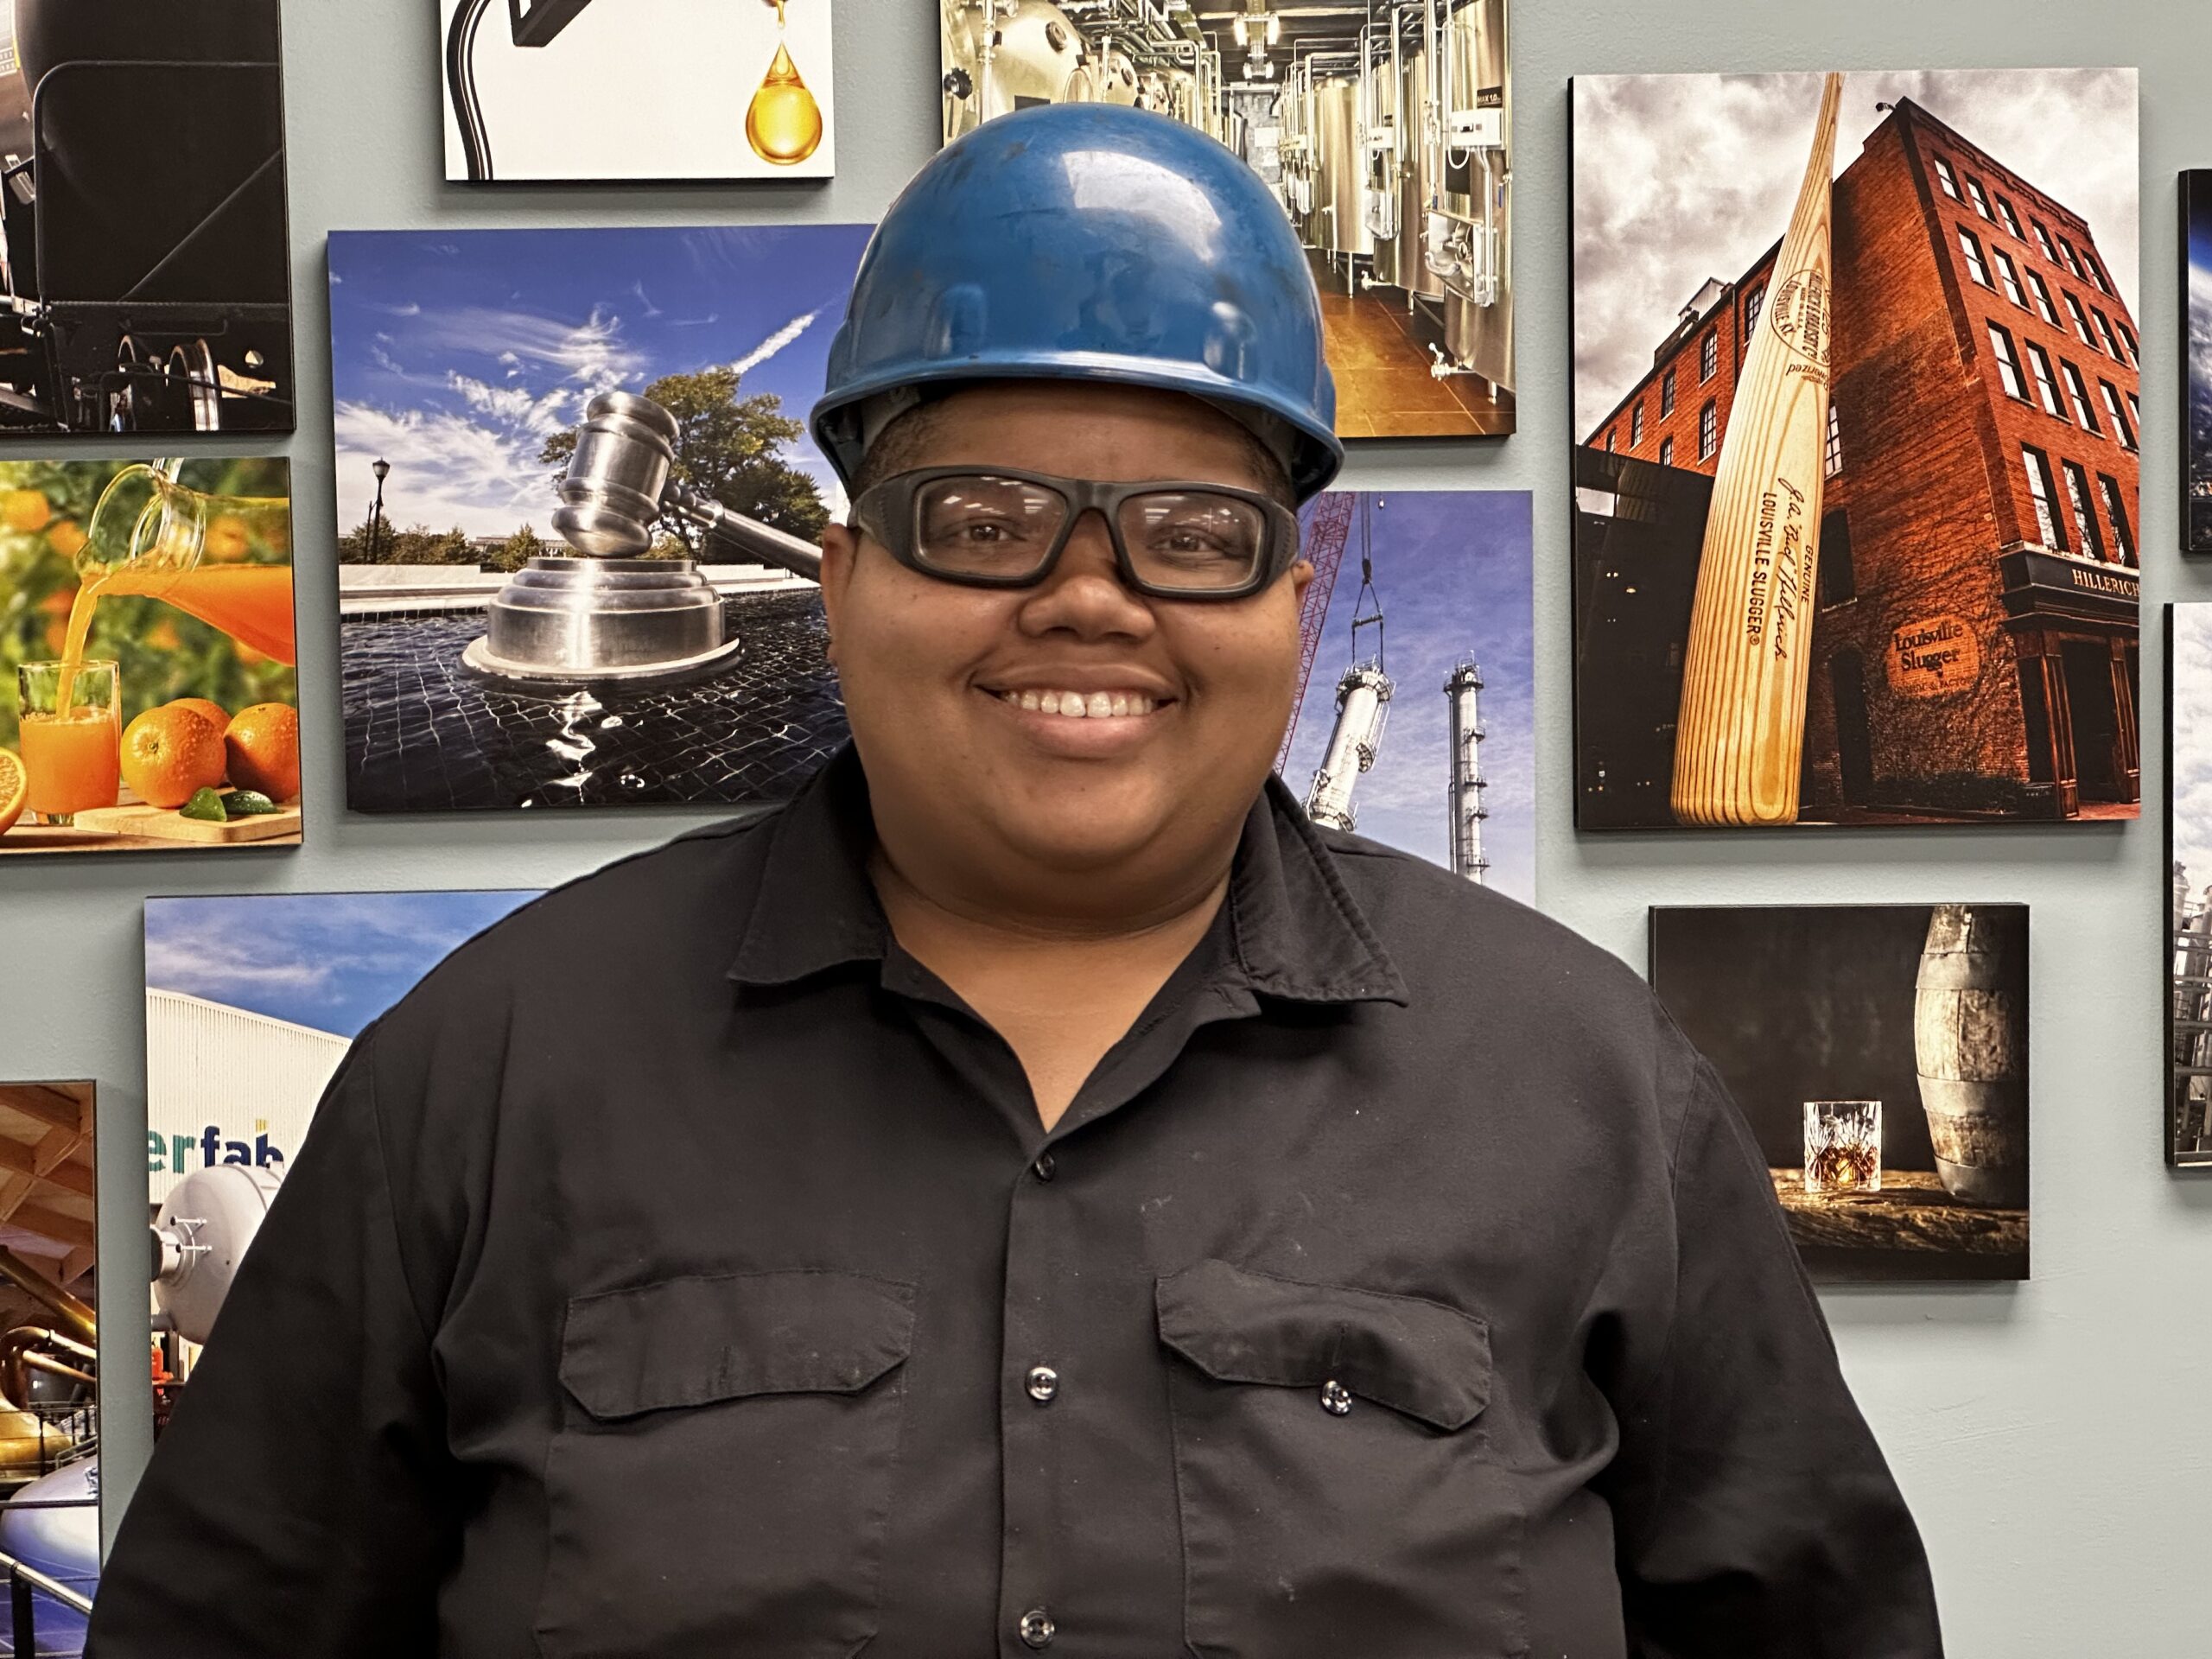 Machine operator Arie Broom stands in front of a Brighton photo collage. She's wearing a hard hat, protective eyewear, and a black button-up shirt.